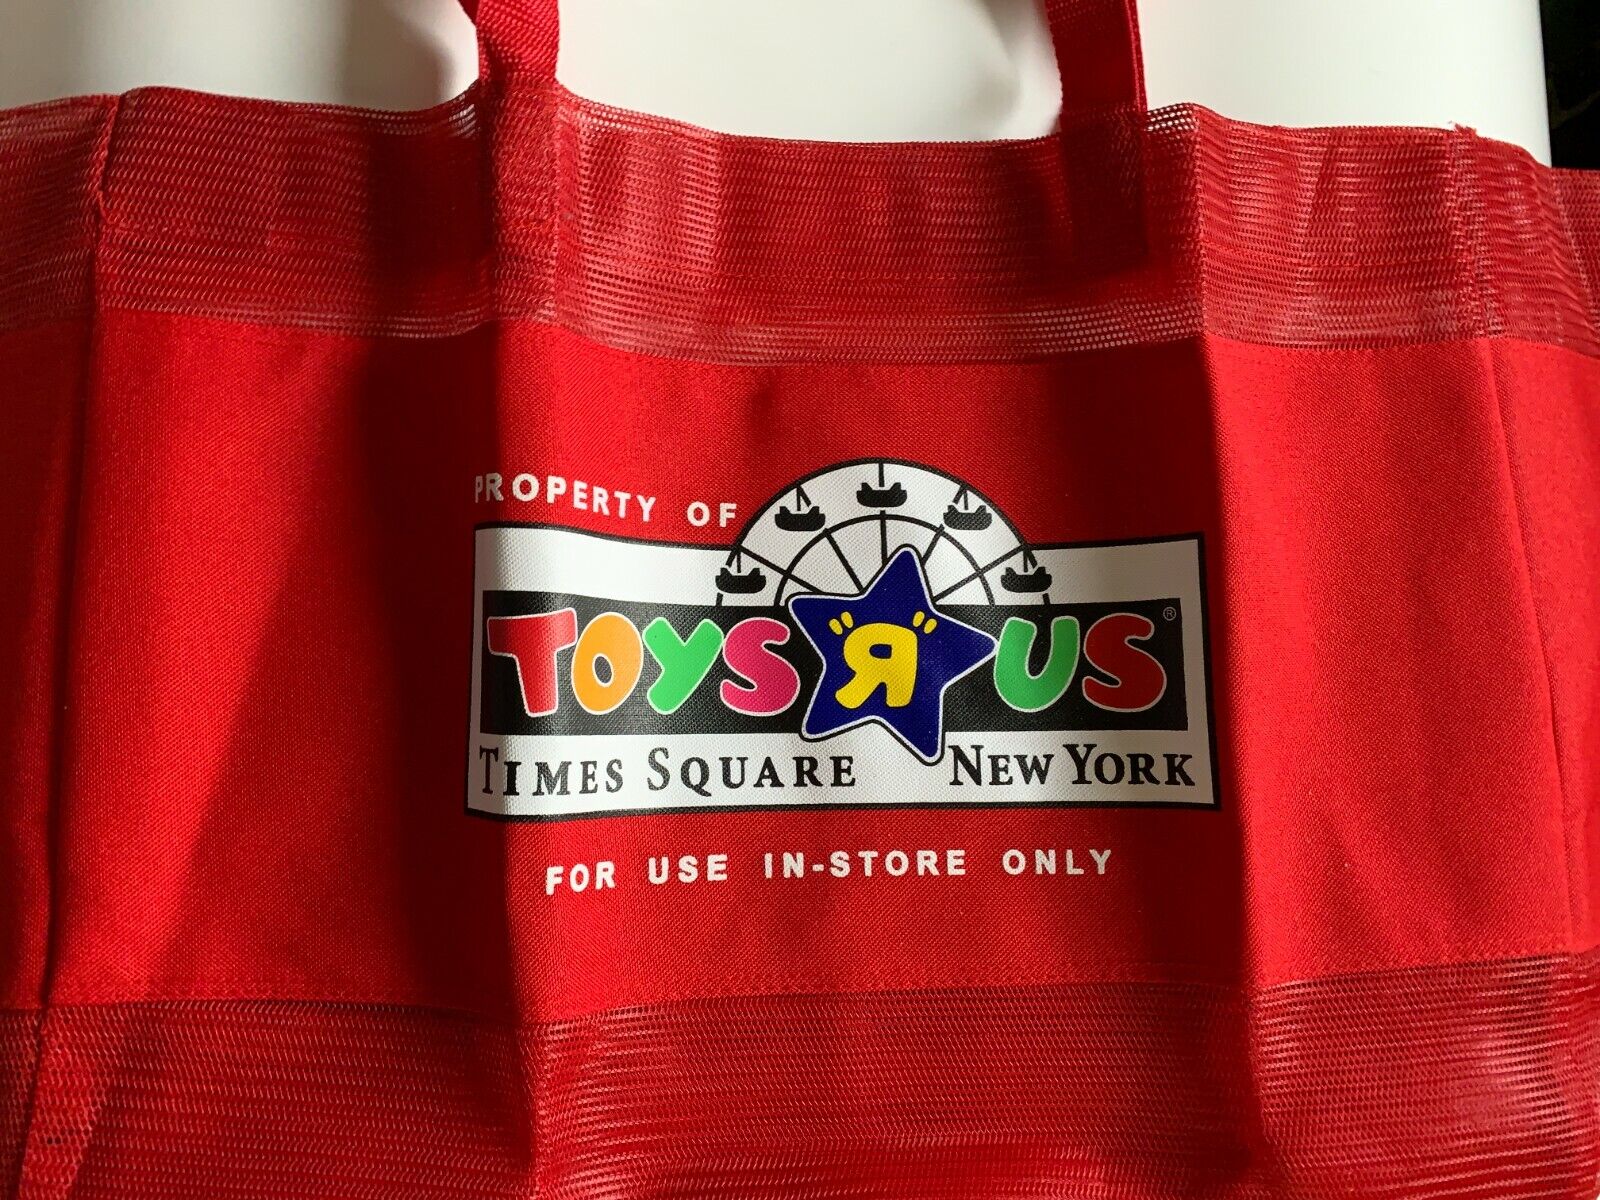 Toys R Us Times Square Inside Store Shopping Bag New Geoffrey - Red